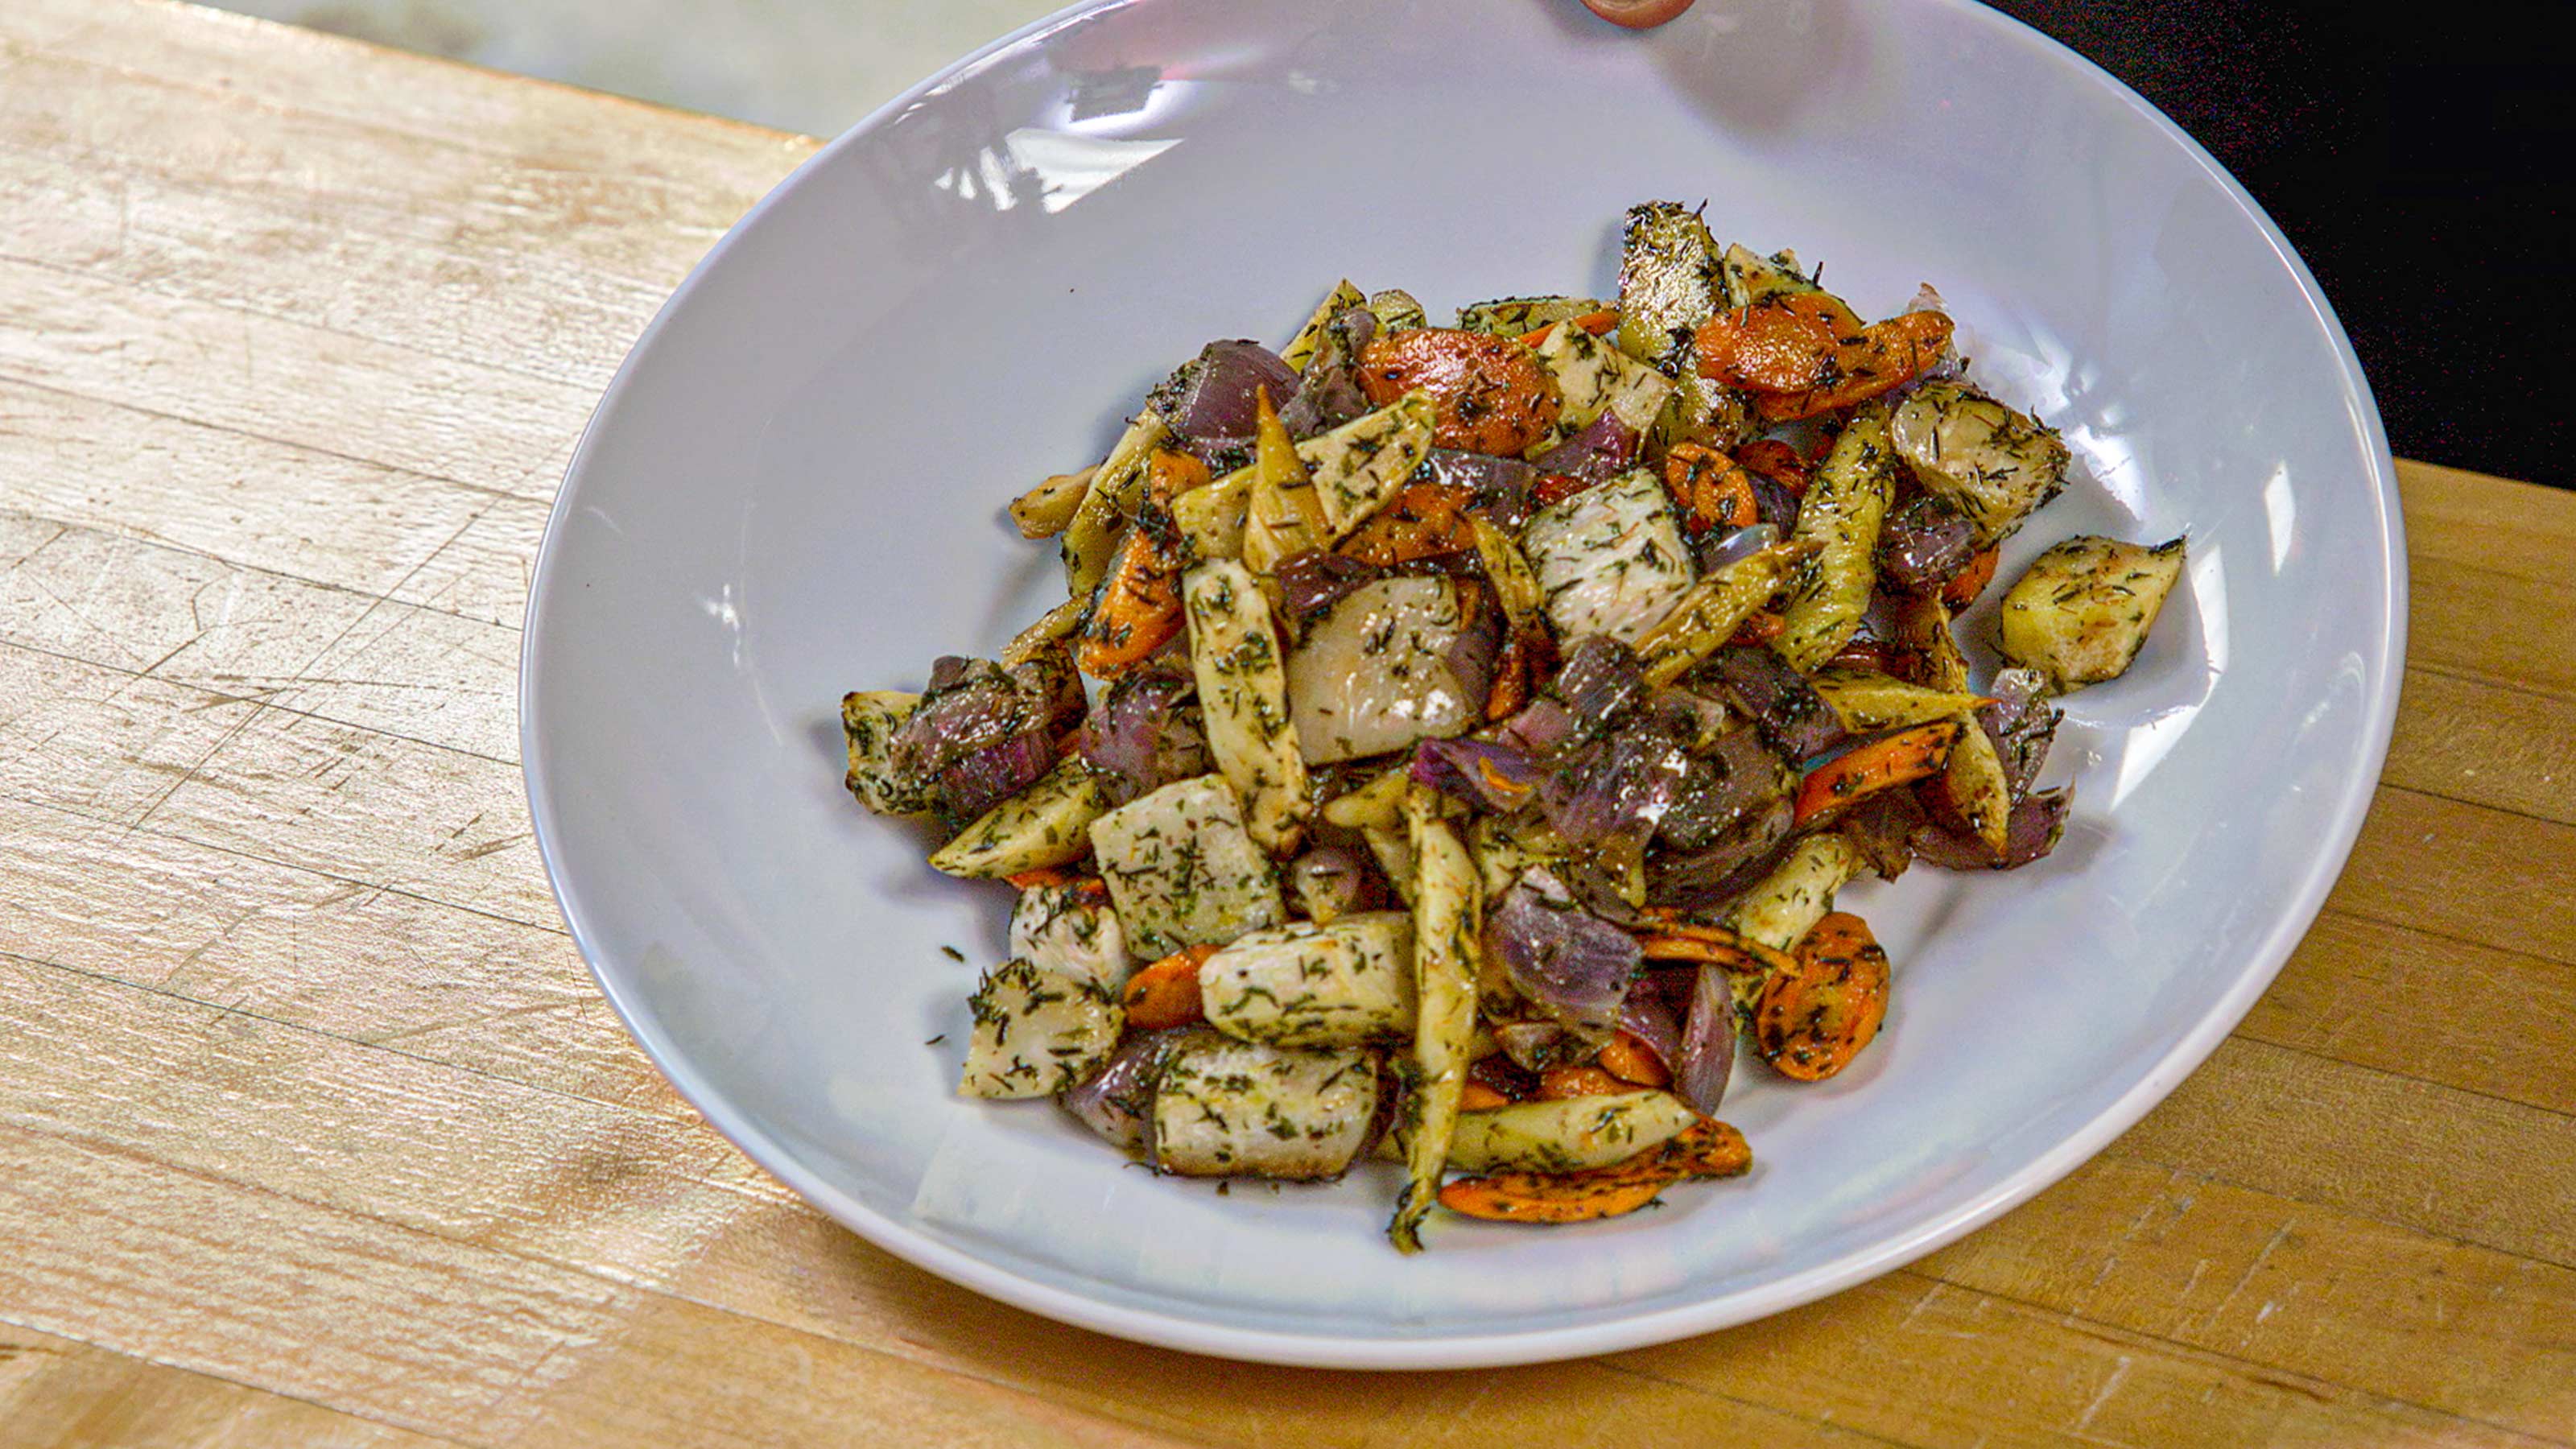 Herb-roasted root vegetables on a plate